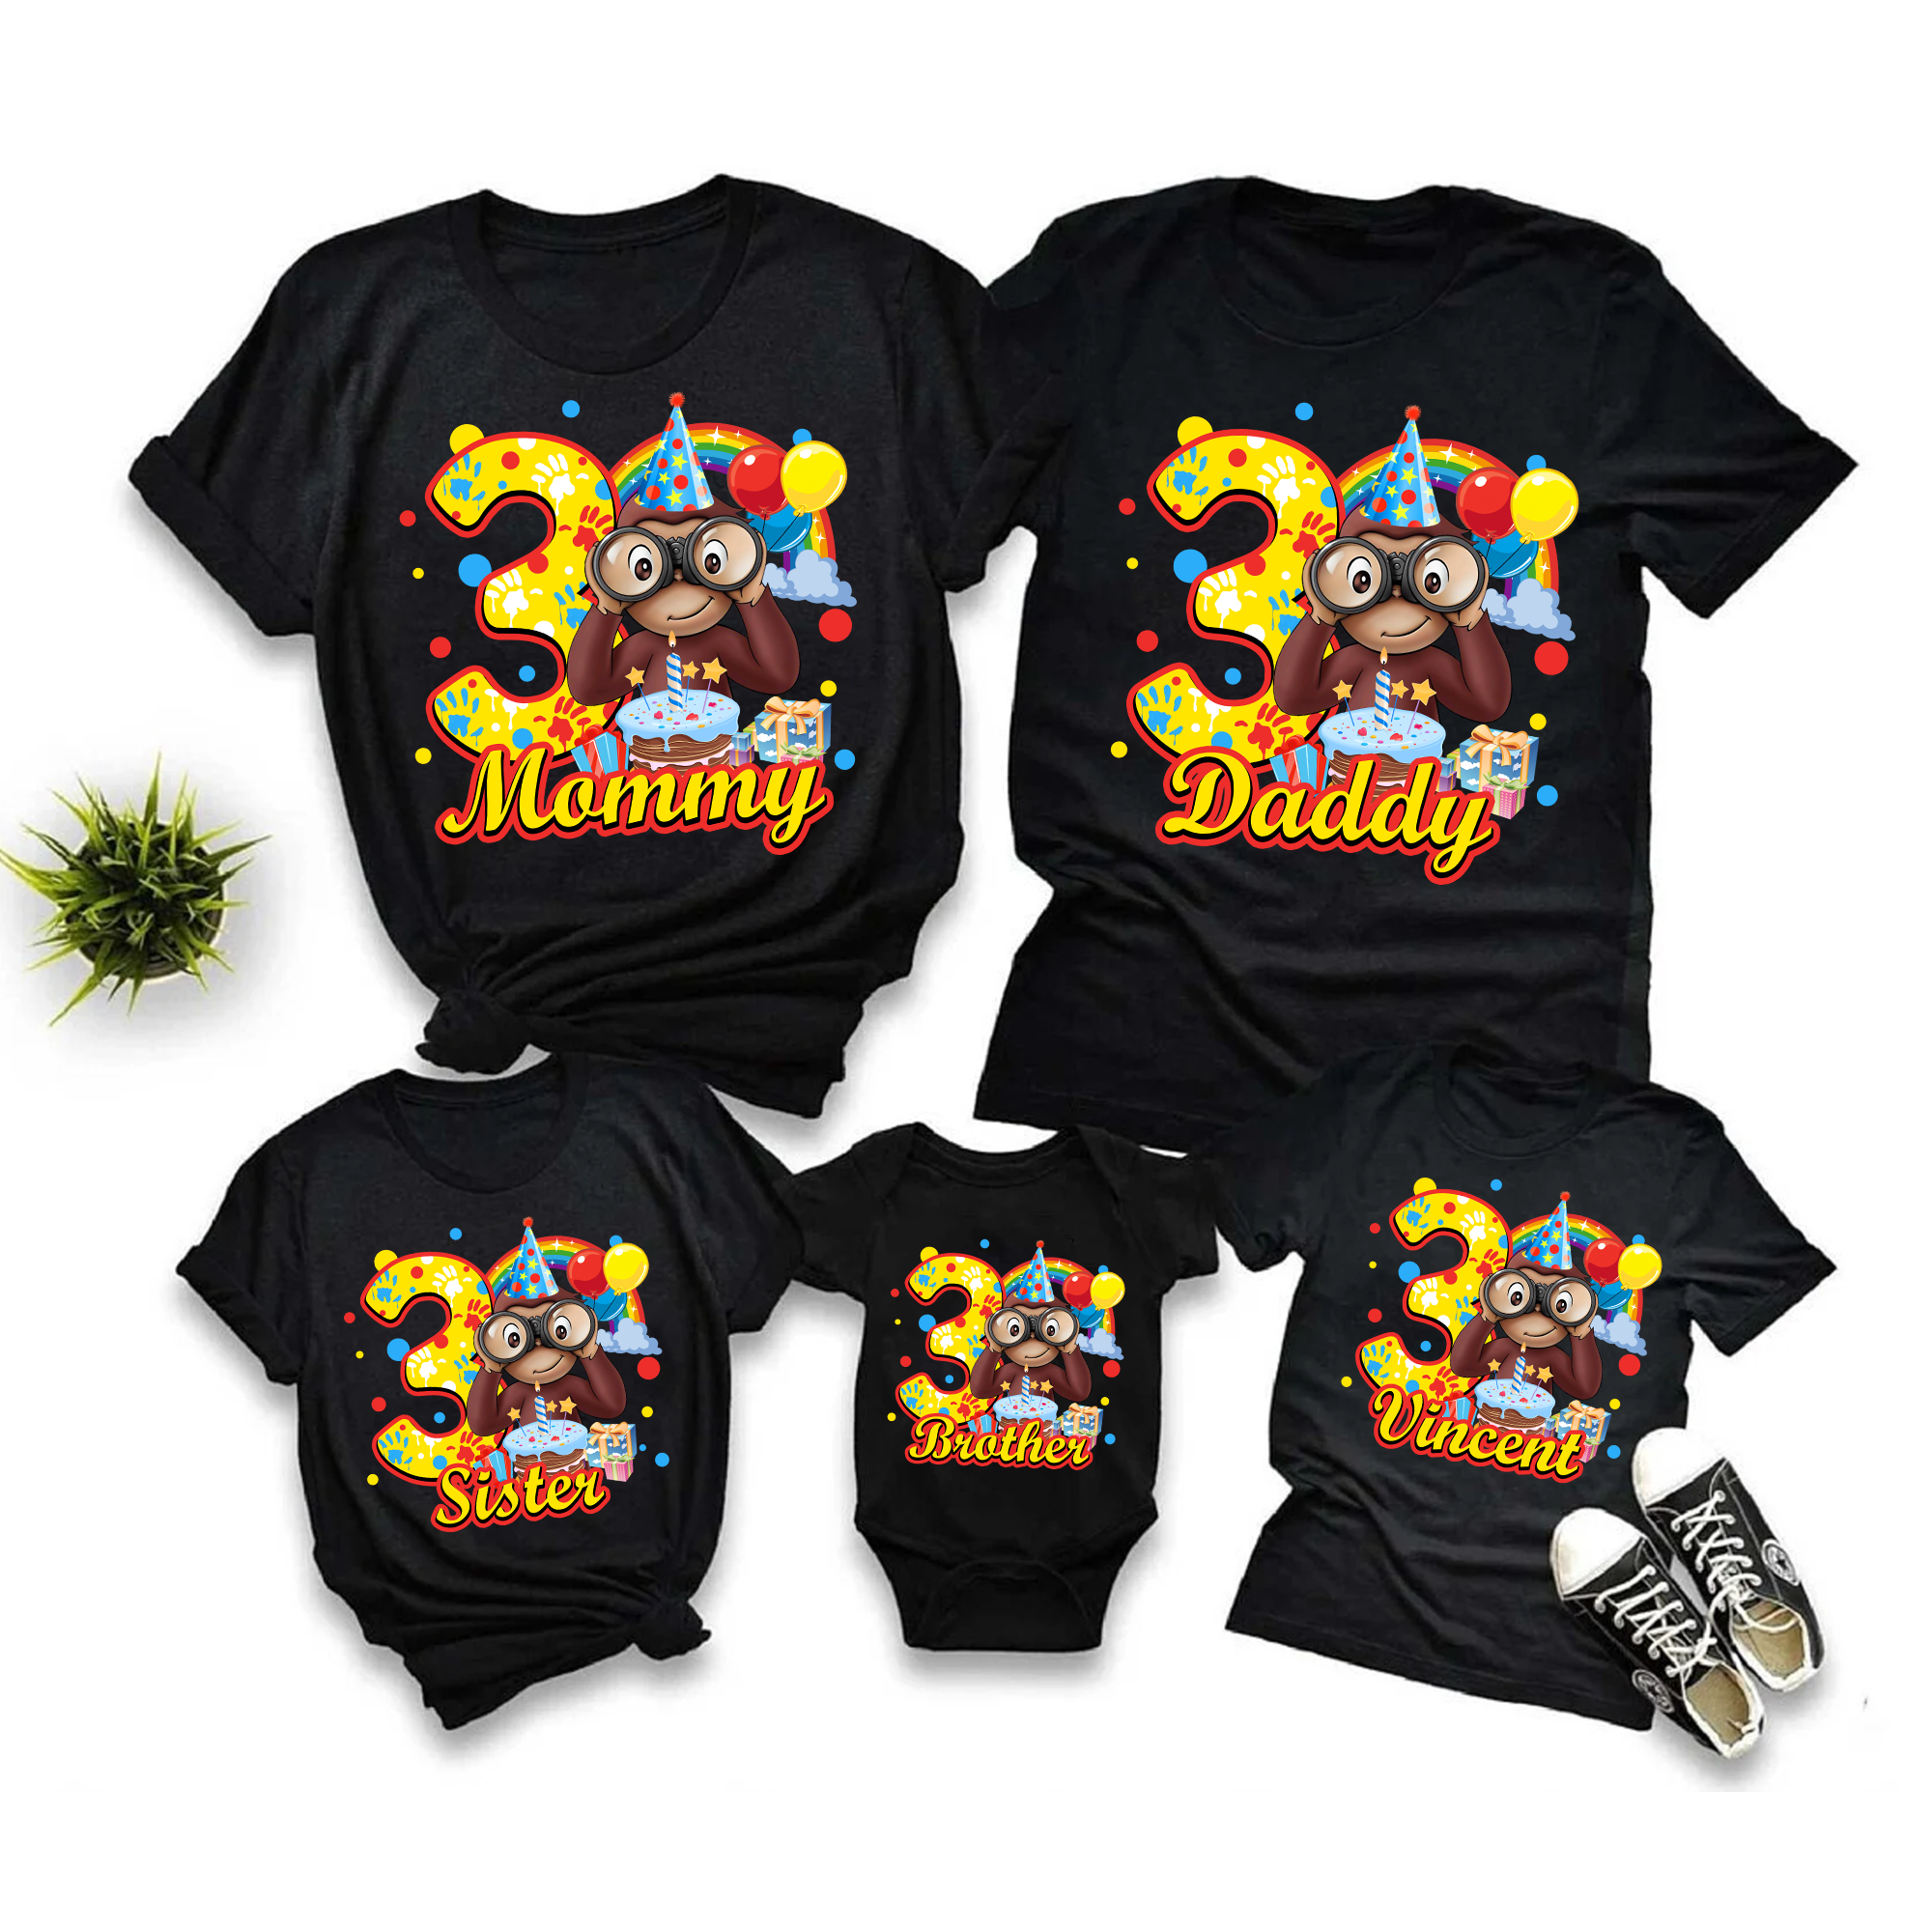 Personalized Curious George Birthday Shirt Personalized Name and Age Customized Curious George Family Shirts